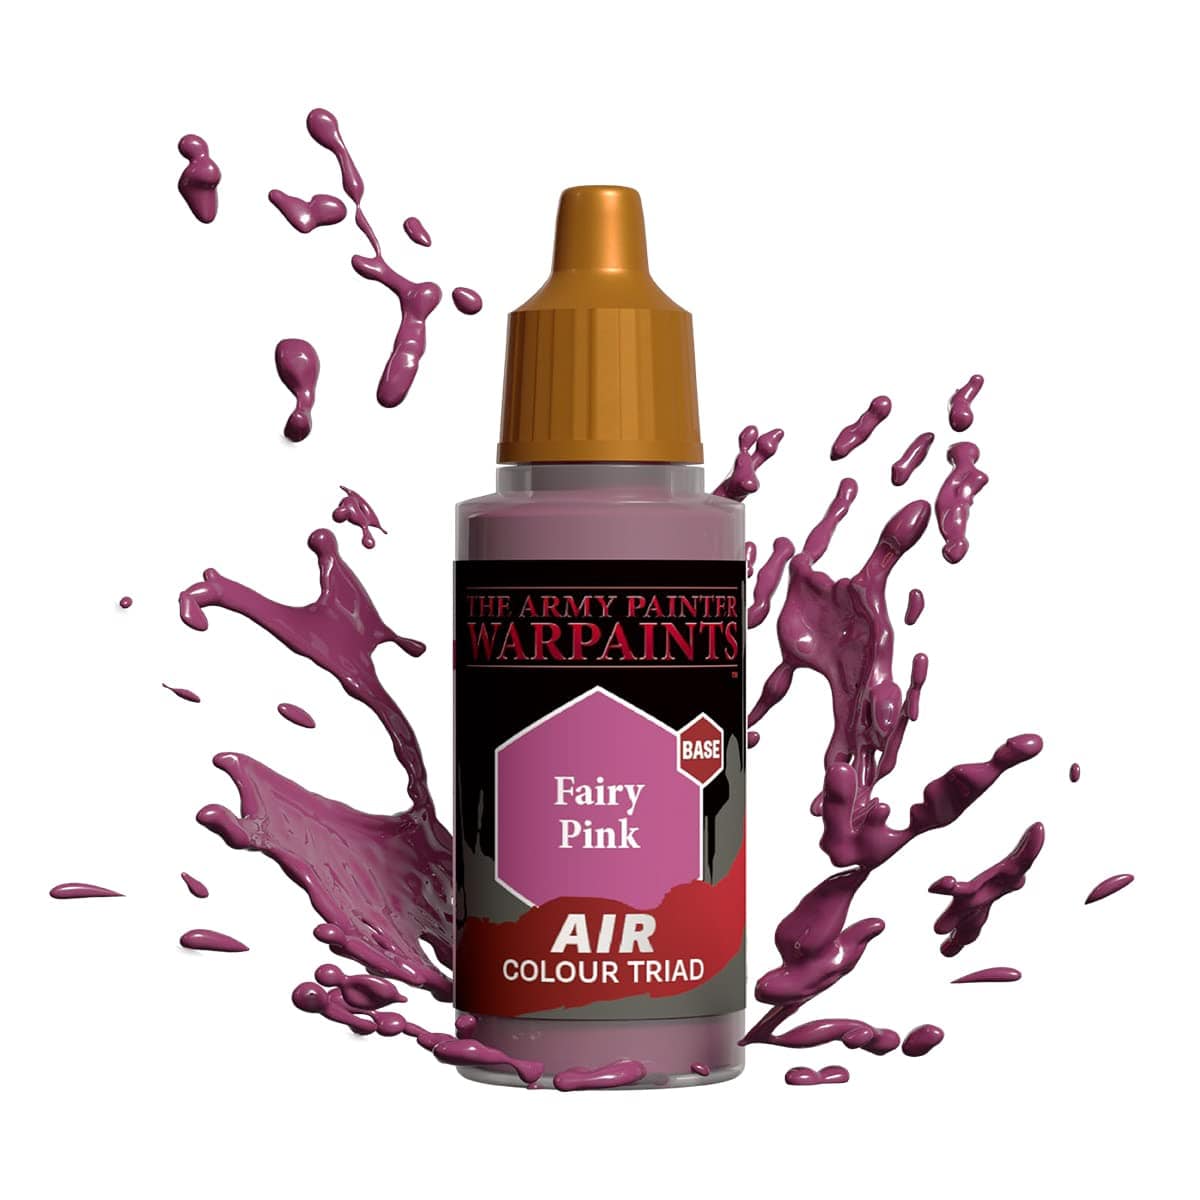 The Army Painter Accessories The Army Painter Warpaints Air: Fairy Pink 18ml